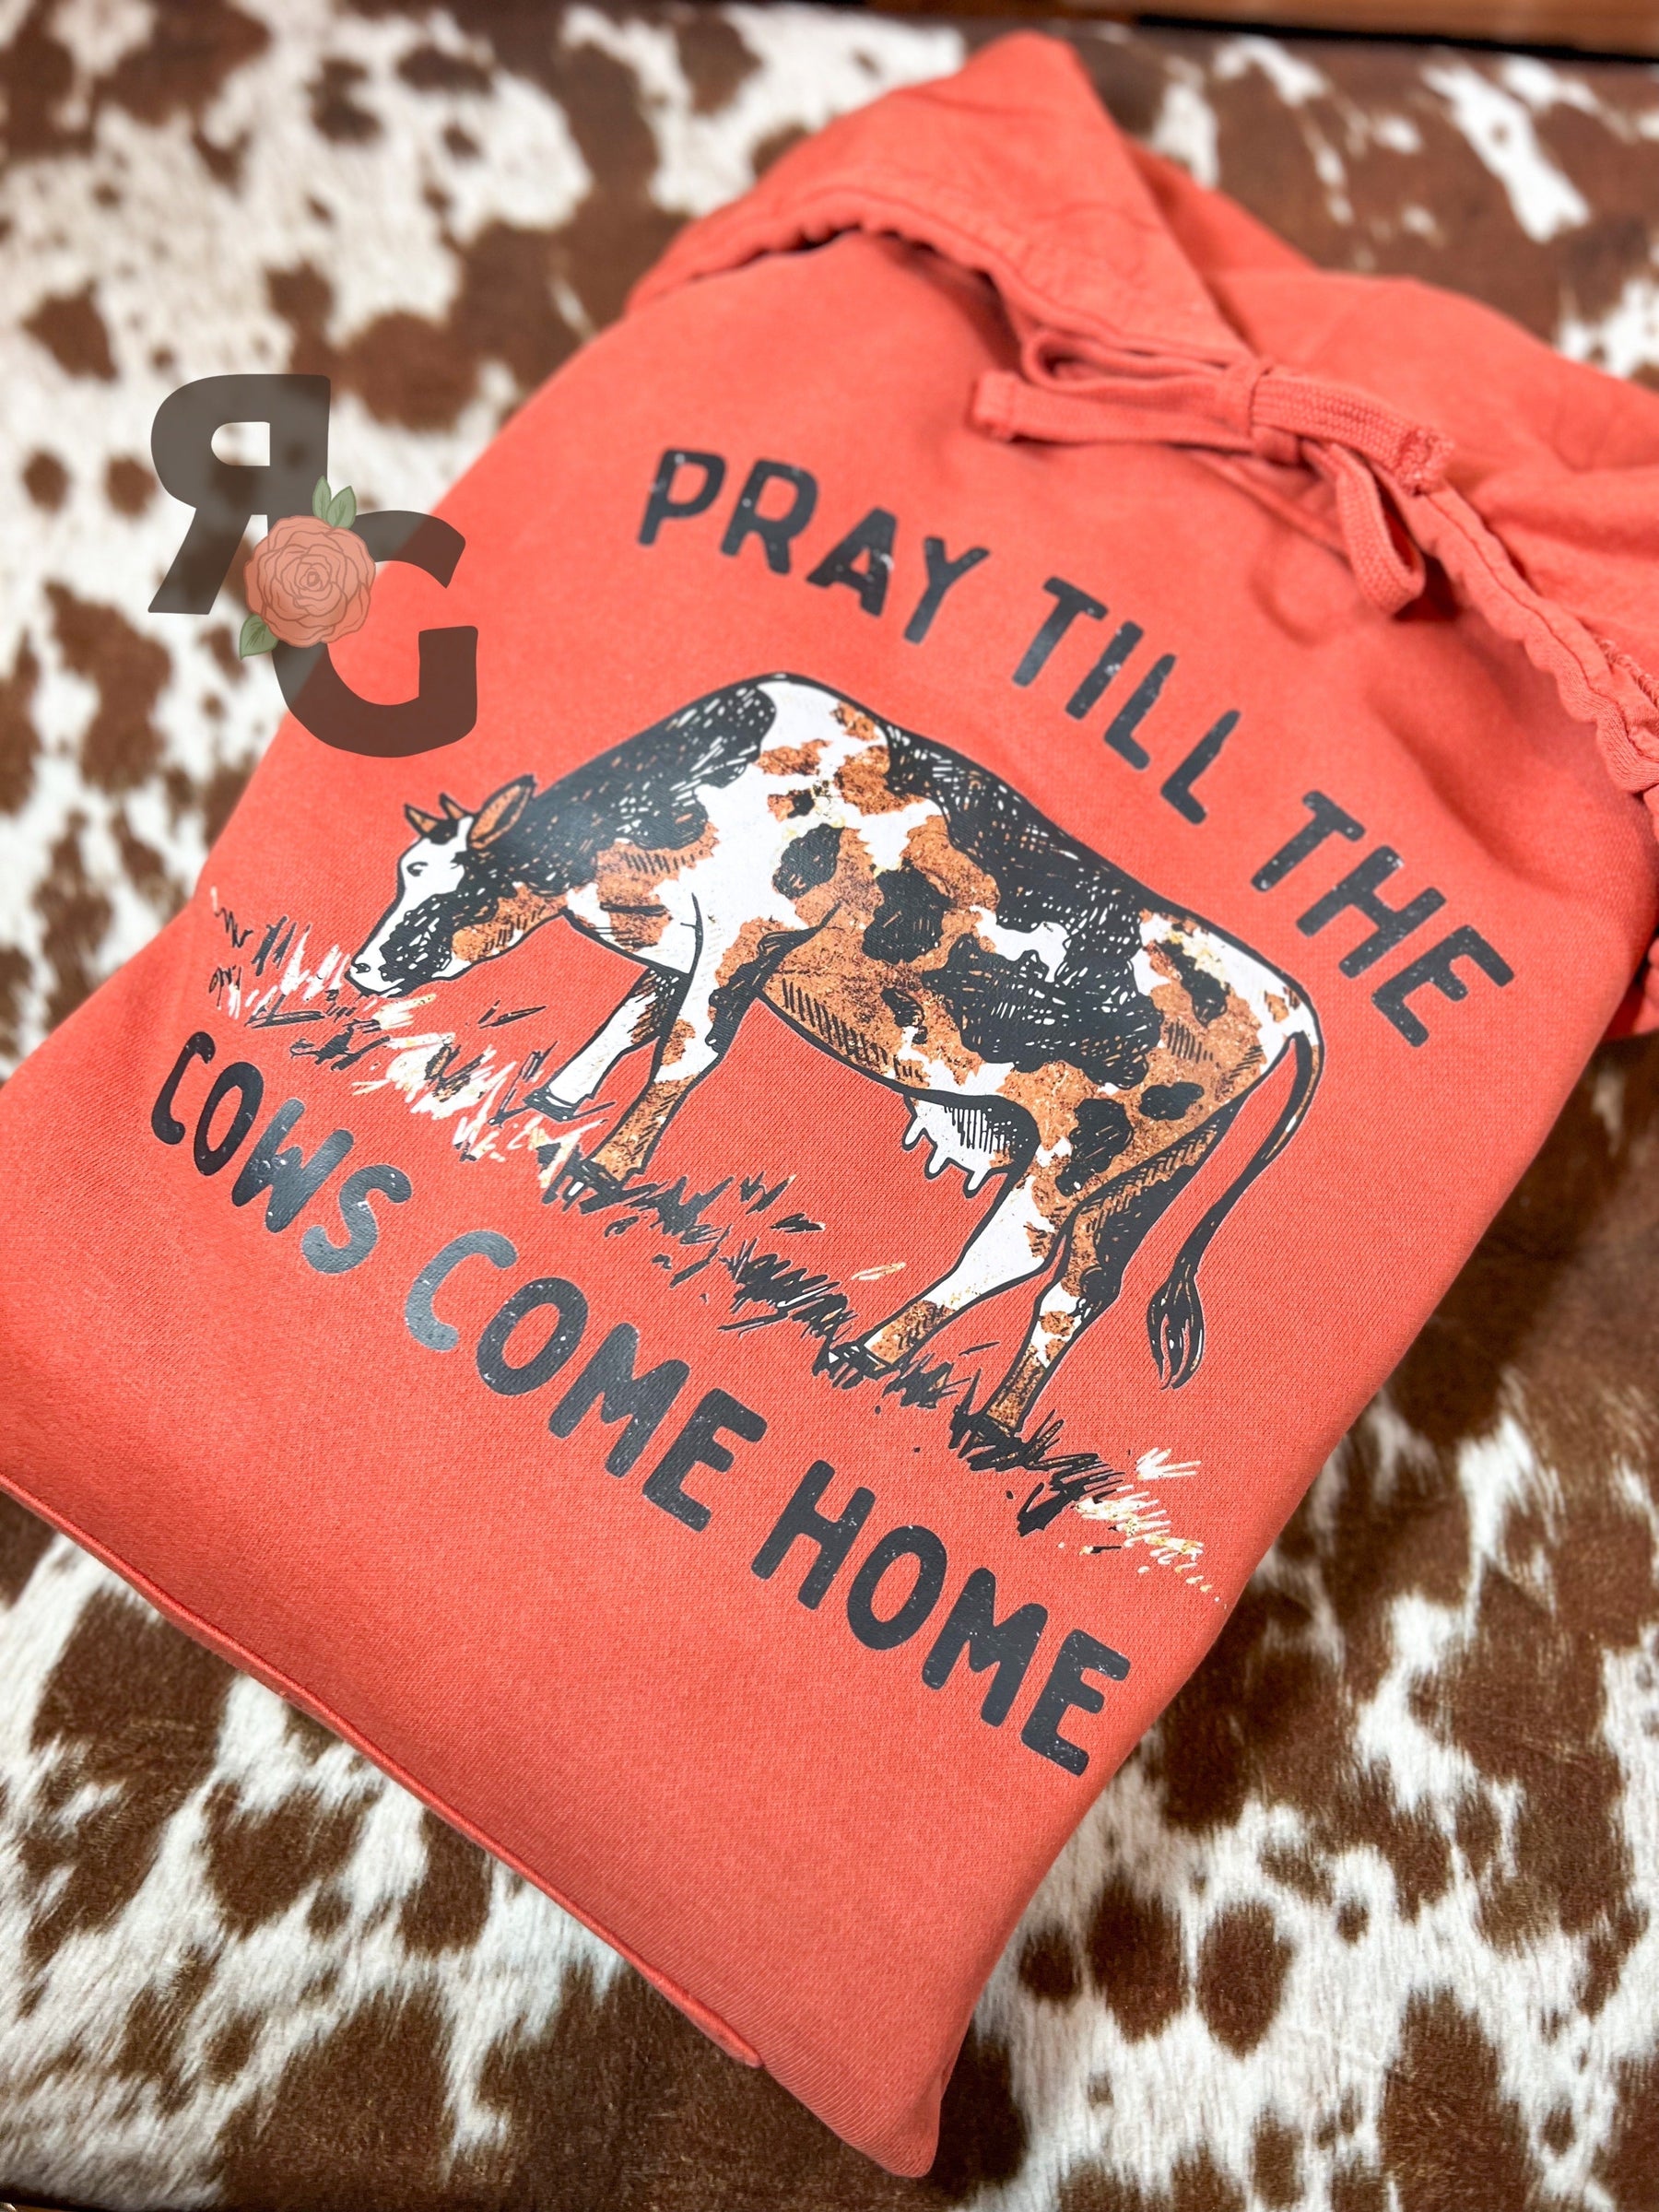 Pray Till The Cows Come Home - Independent Trading Co Hoodie Rose with Grace LLC